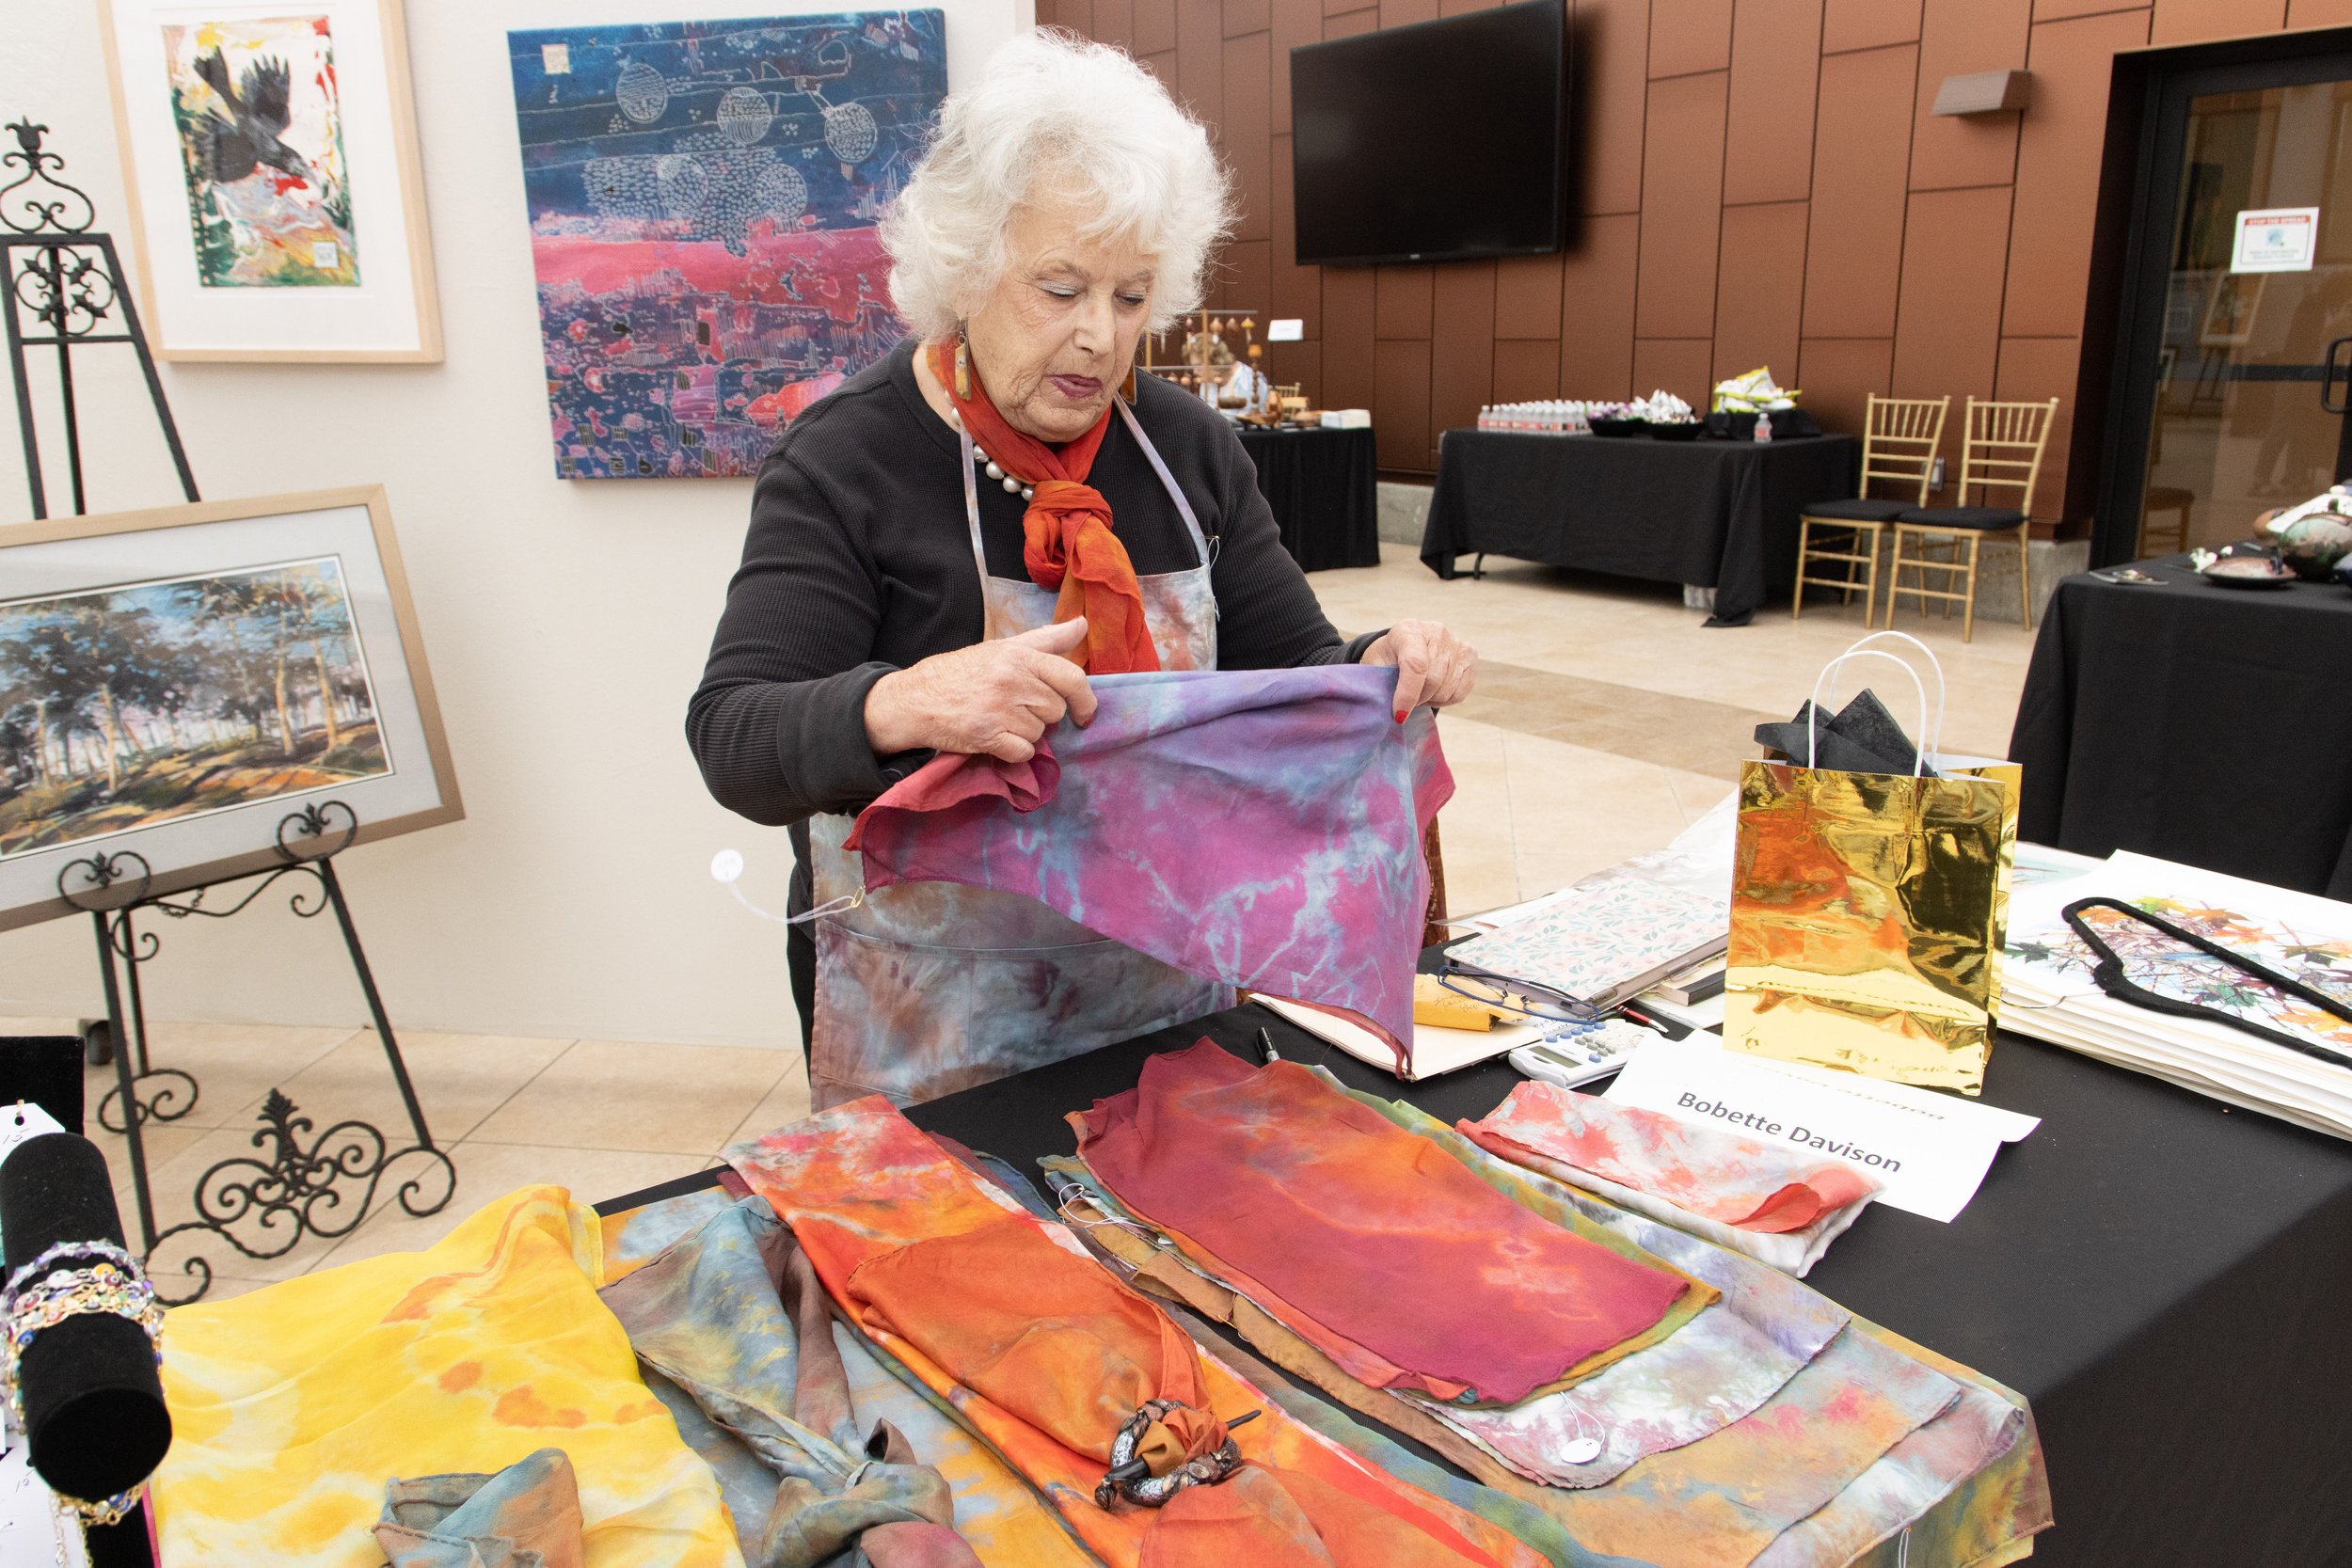 Bobette Davidson displaying her various handmade scarves and framed watercolor art pieces